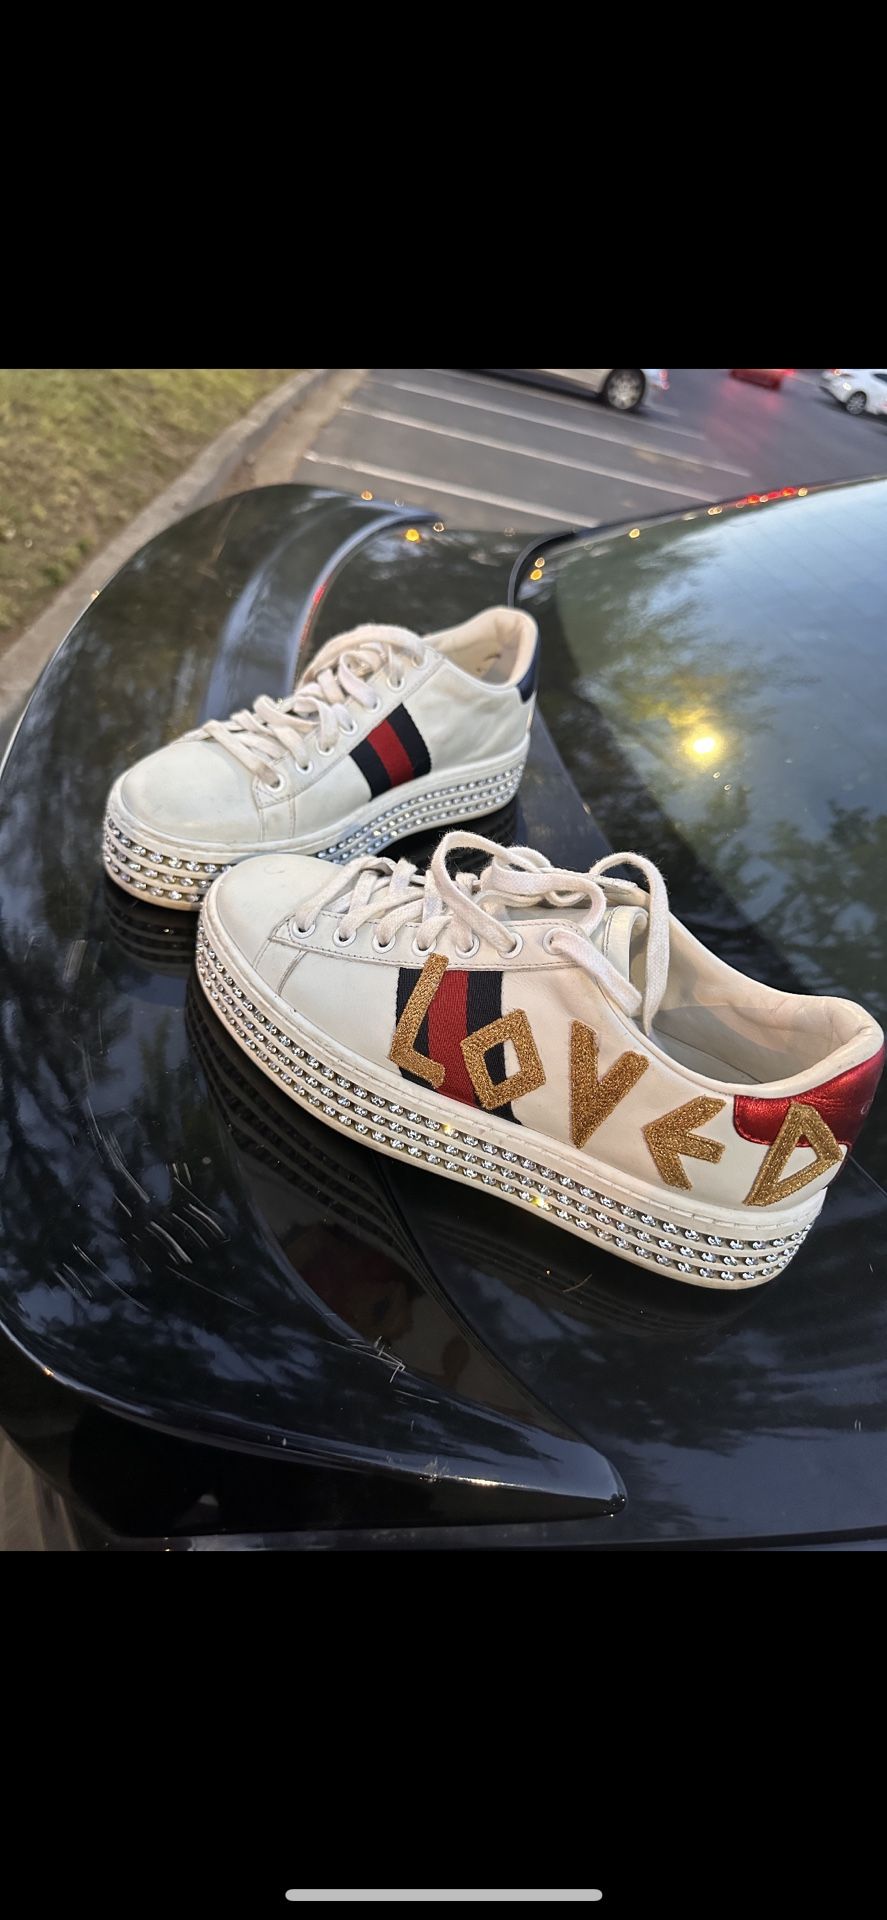 “Ace Embroidered Love” Gucci